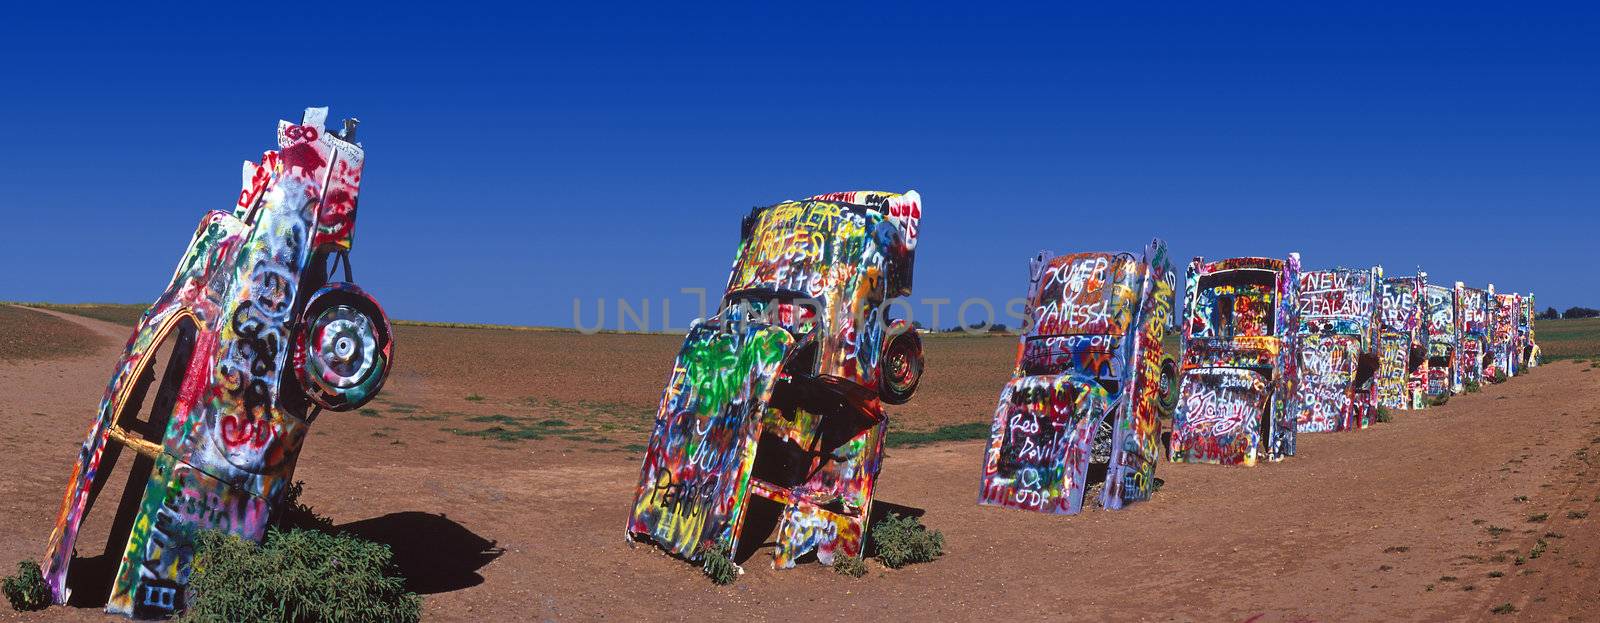 painted cars sticking out the ground at Cadillac Ranch in Amarillo, Texas